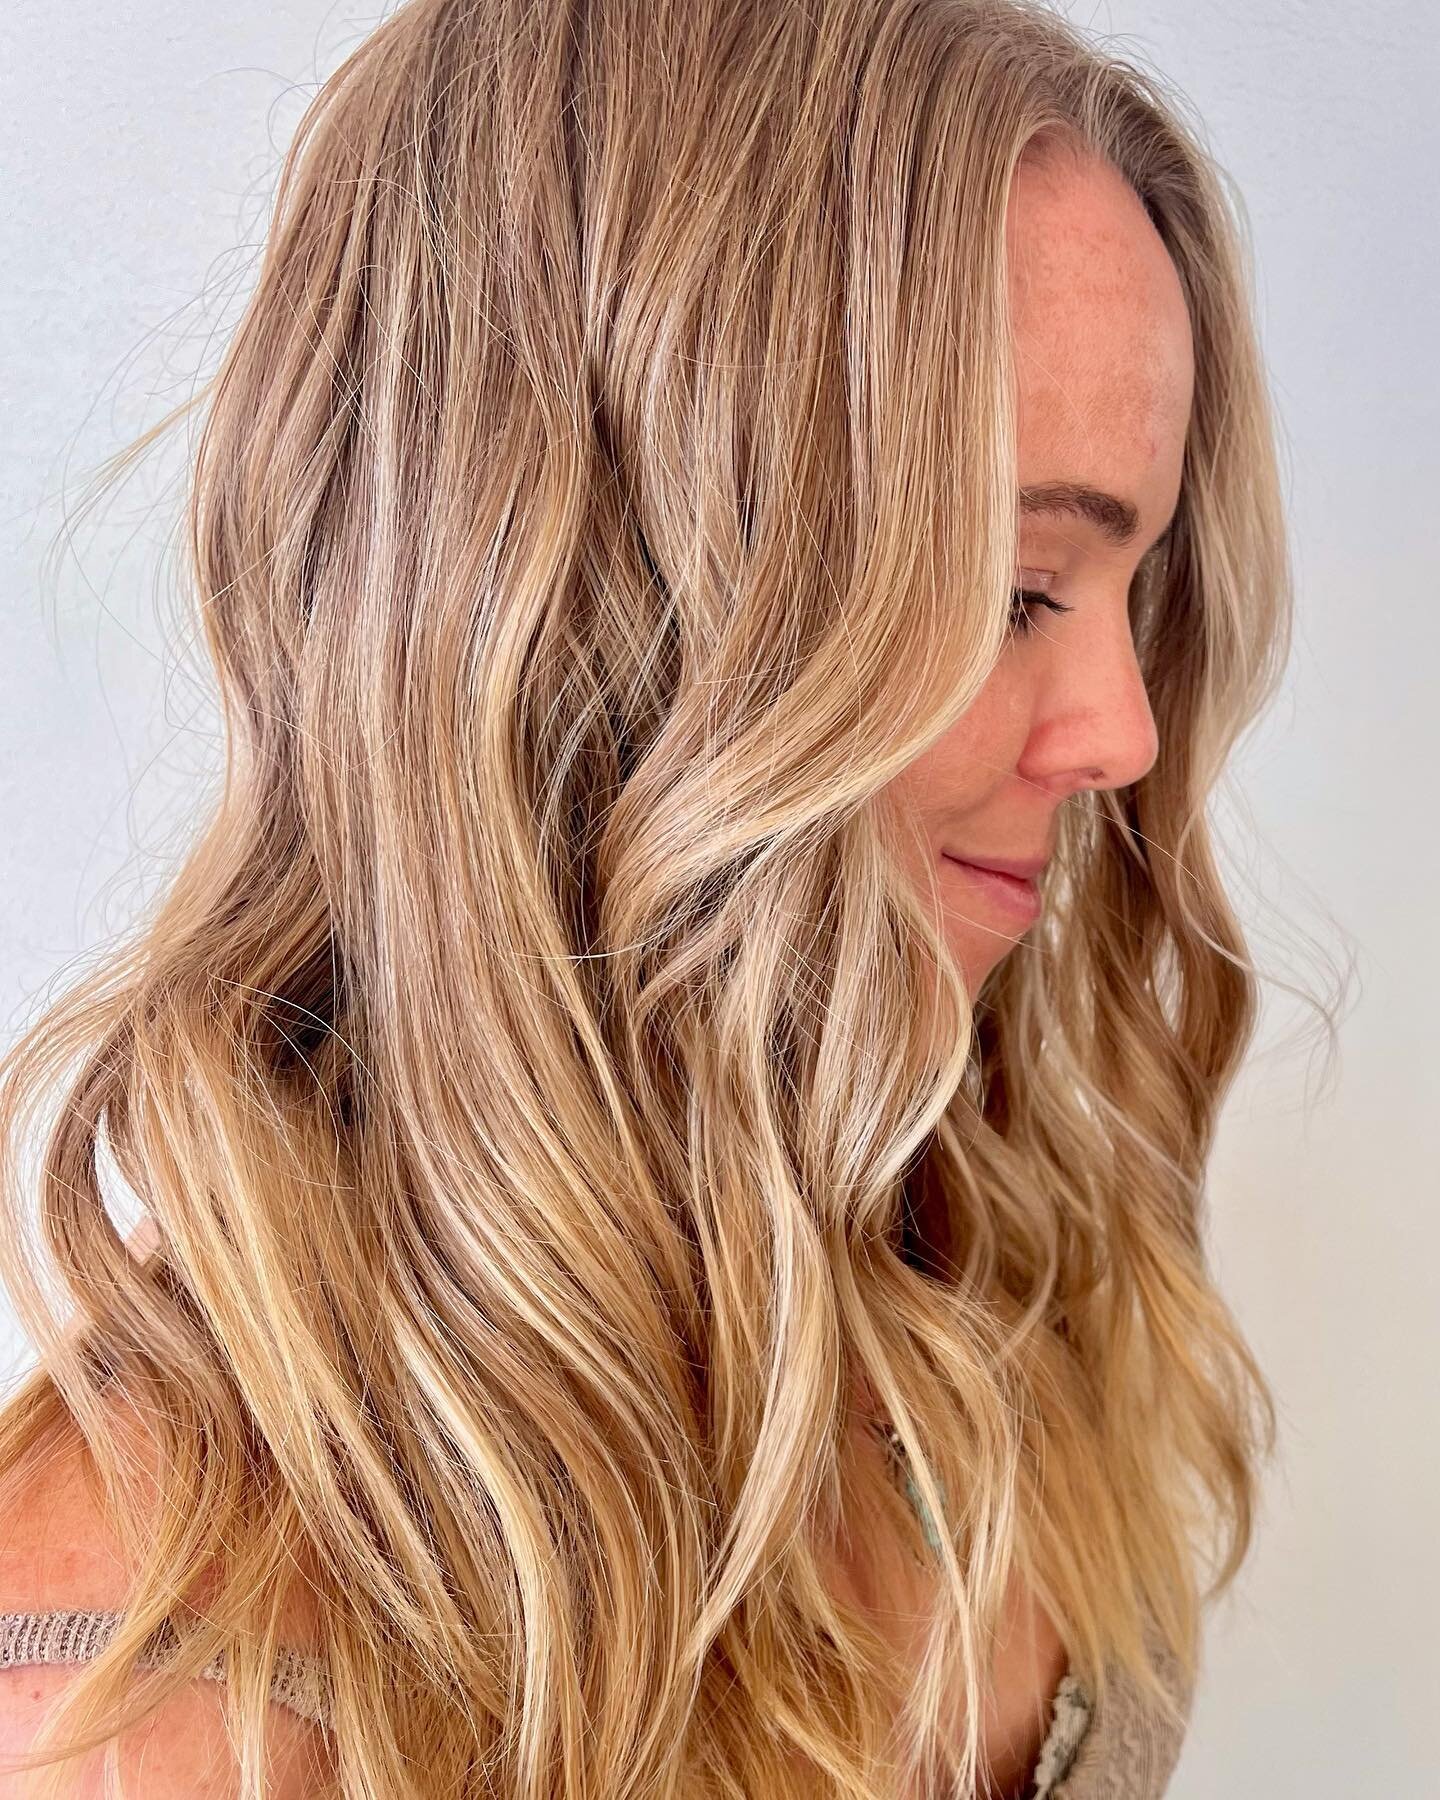 Fall blondes, always and forever!
&bull;
All of this gorgeousness: @hairbytealkelly 
&bull;
#salidacolorado #downtownsalidacolorado #coloradohairsalon #loticsalon #salidacoloradohair #salidacoloradohairsalon #blondesofinstagram #fallblonde #fallblond